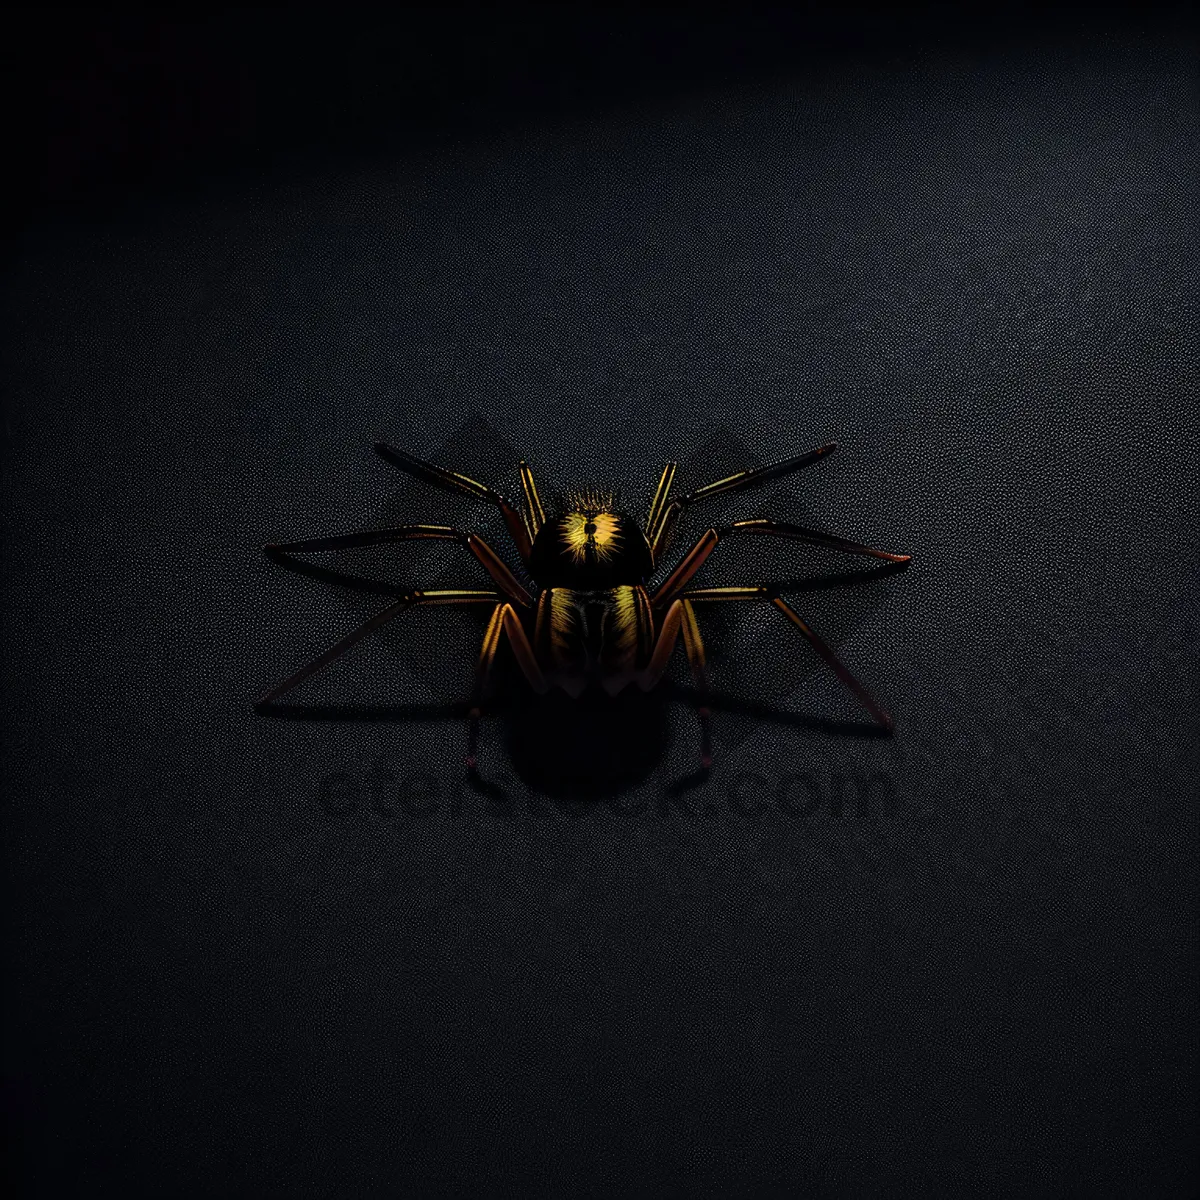 Picture of Close-up of a Black Widow Spider